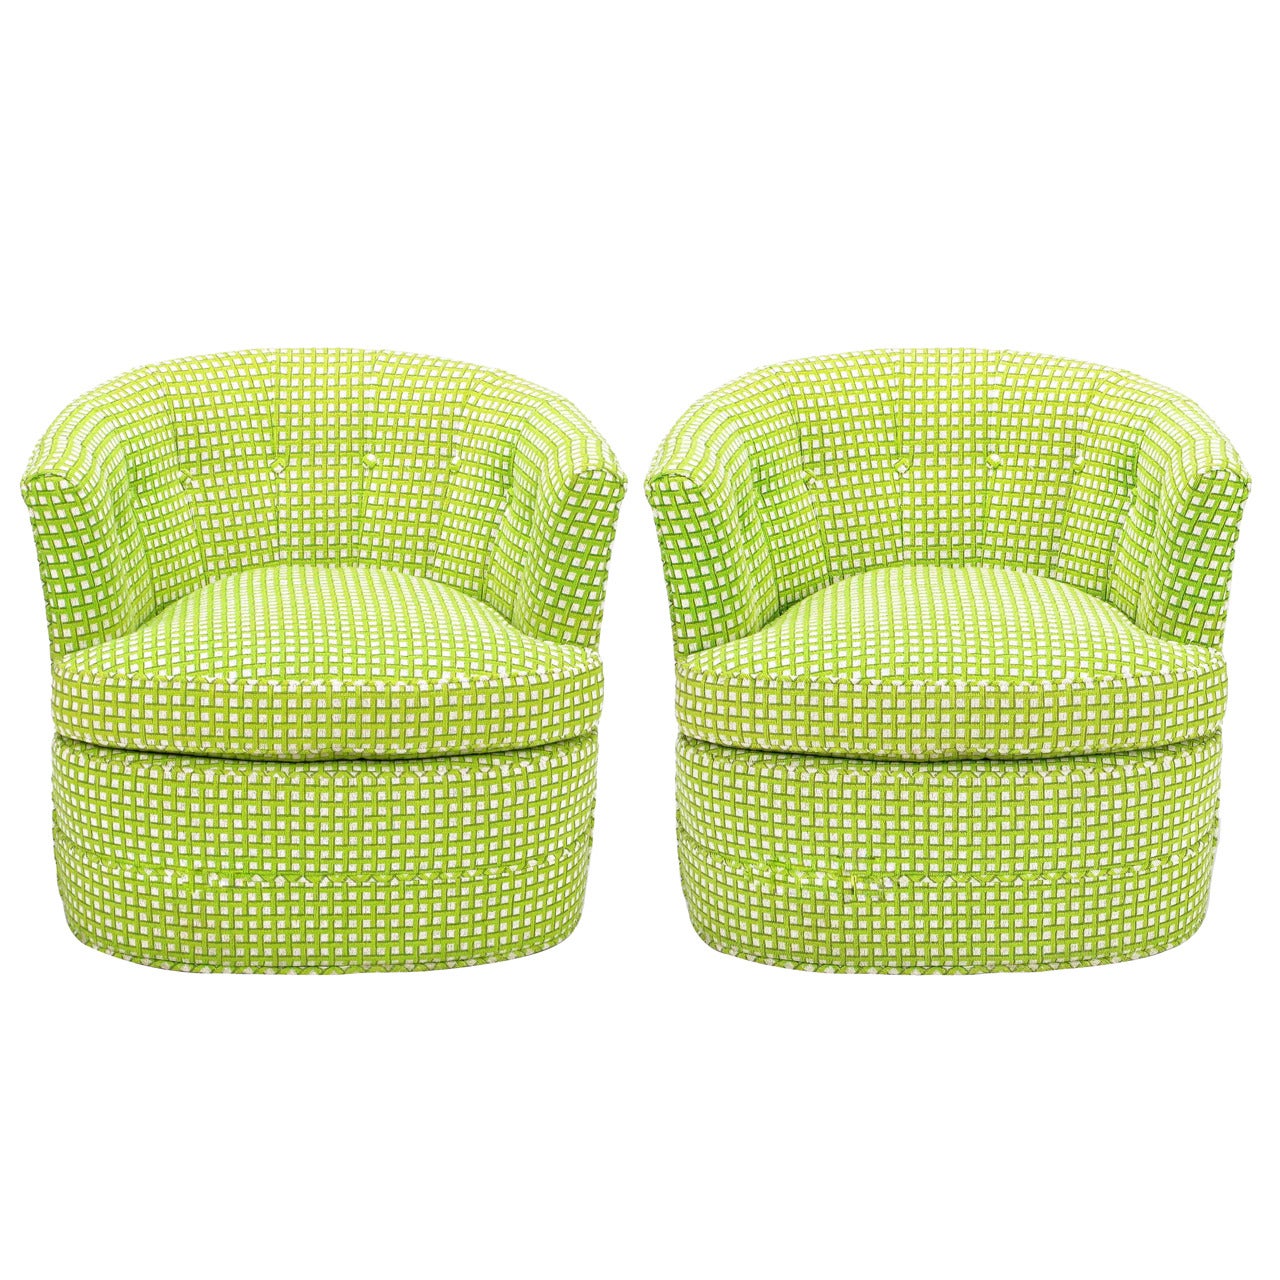 Pair Barrel Back Swivel Chairs In Chartreuse Needlepoint